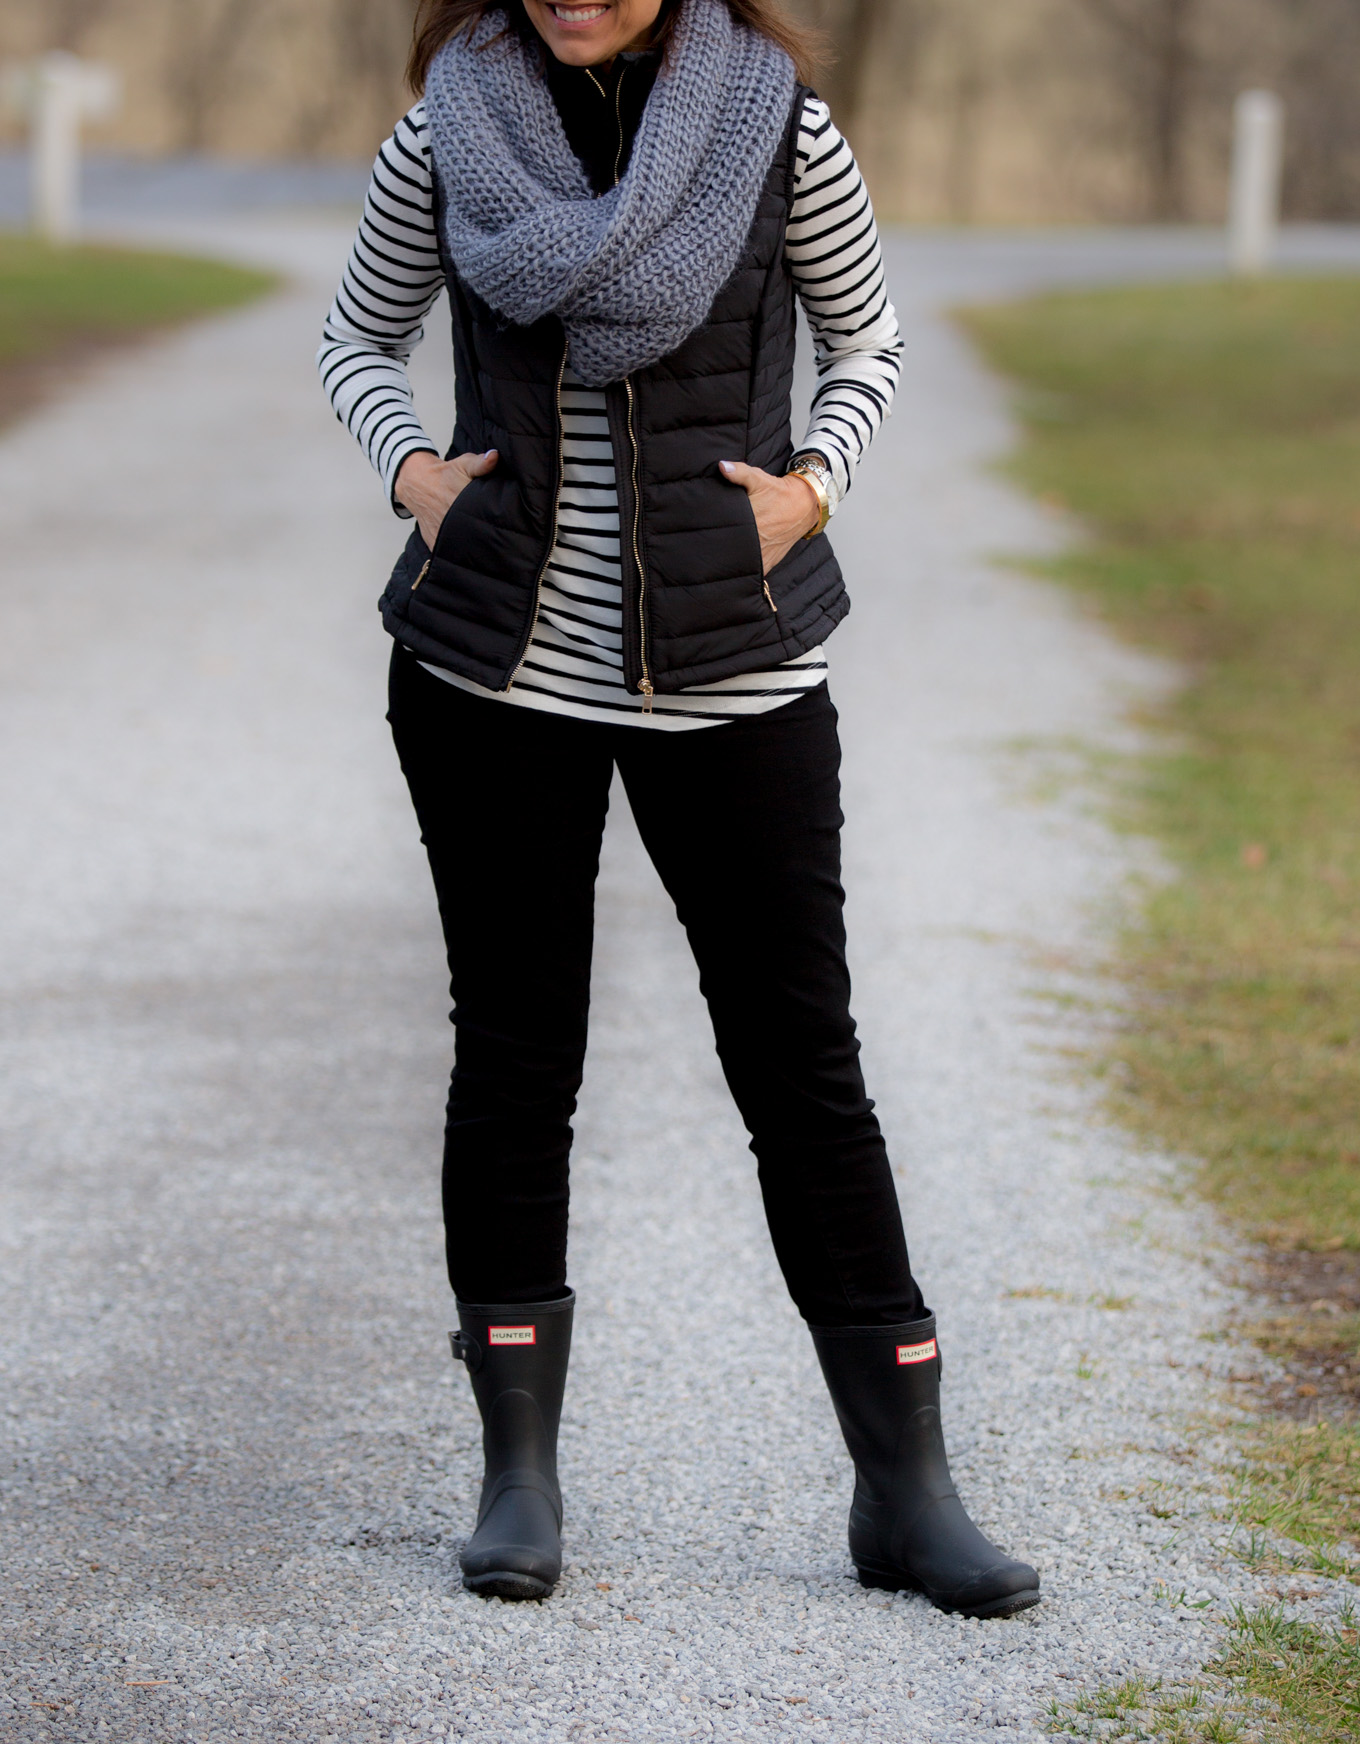 Over 40 fashion blogger, Cyndi Spivey, styling a black quilted vest.